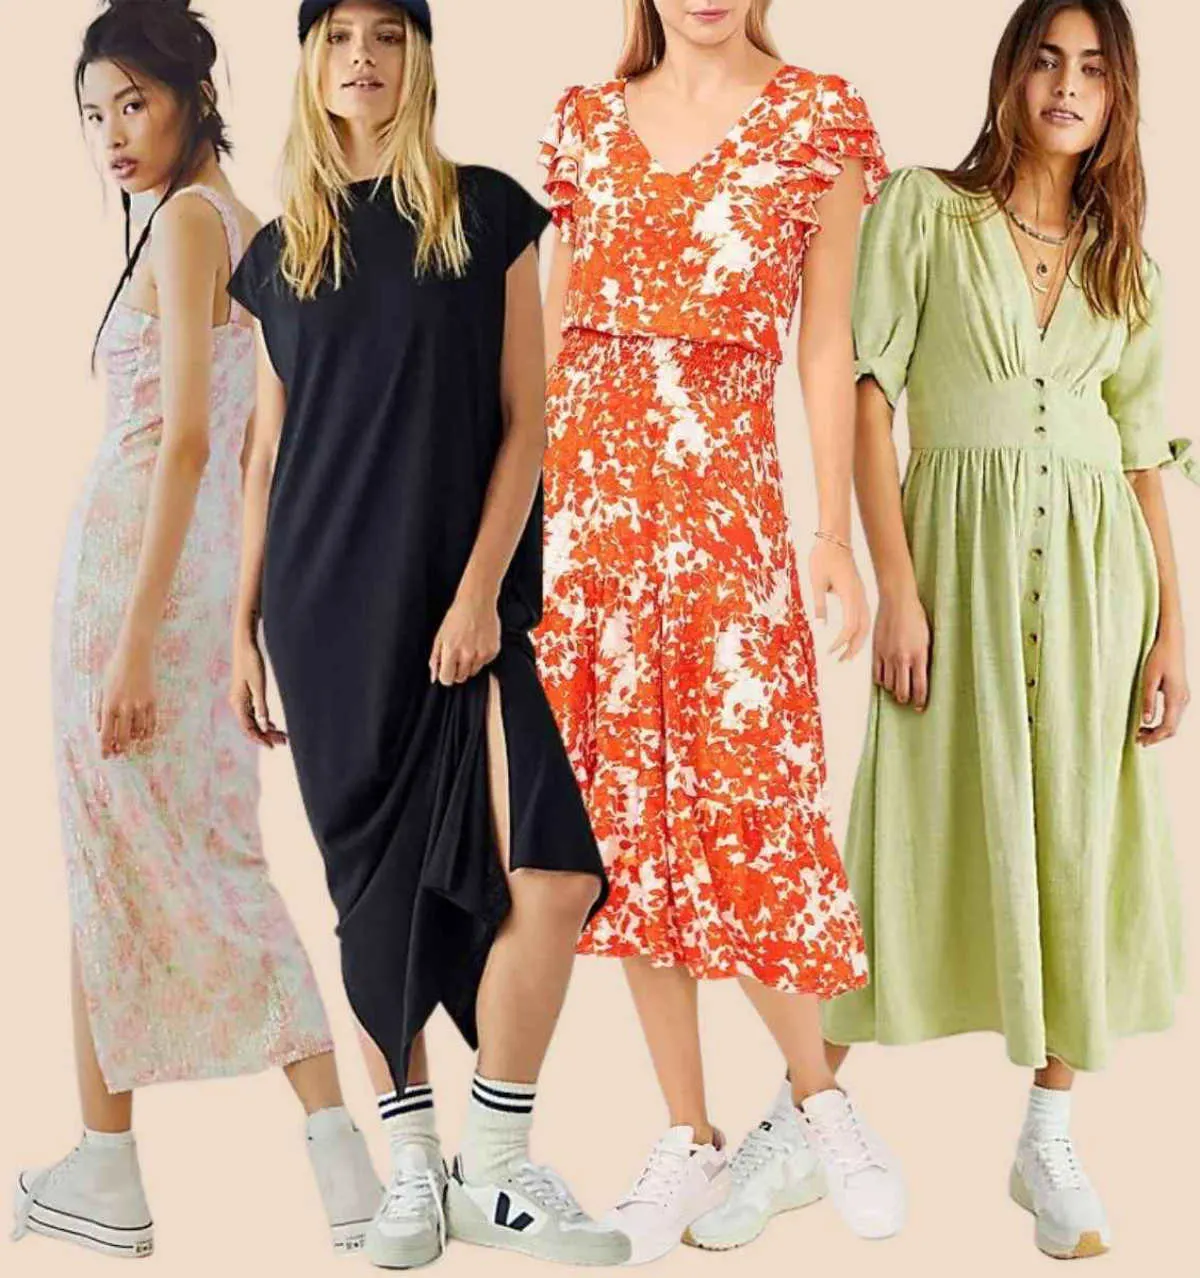 What Shoes To Wear With A Floral Midi Dress?